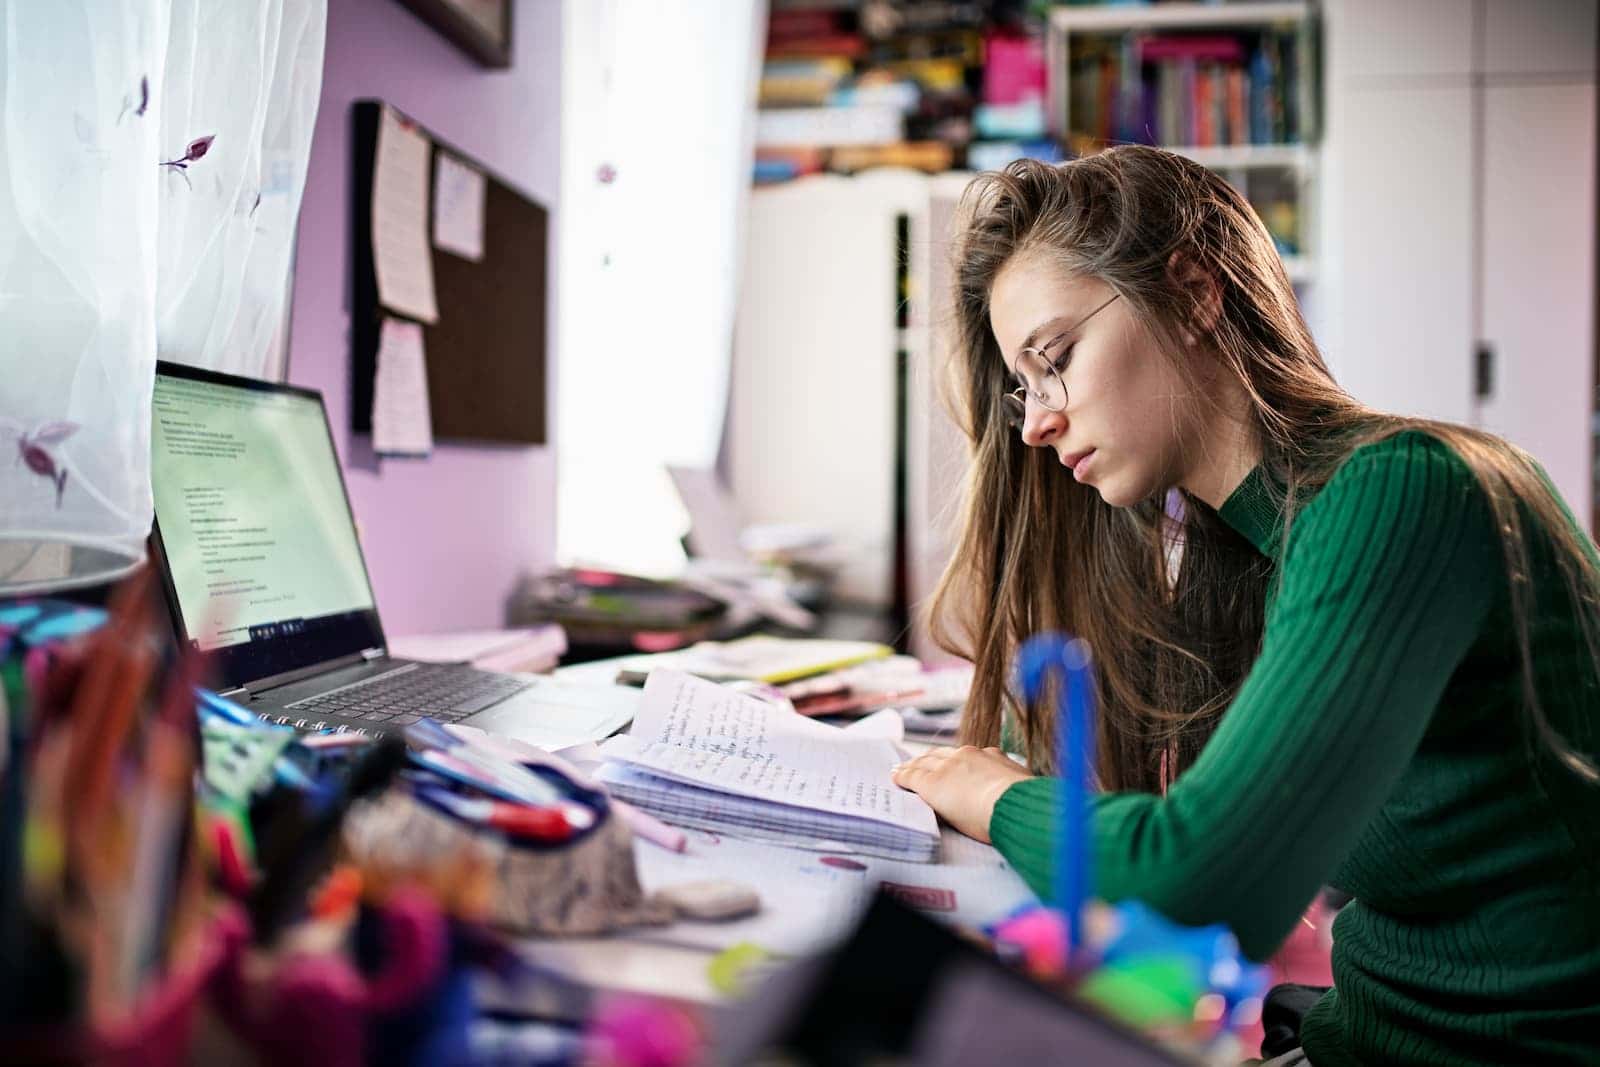 teenage girl sitting at desk with documents, laptop, and books. glasses on and post-its